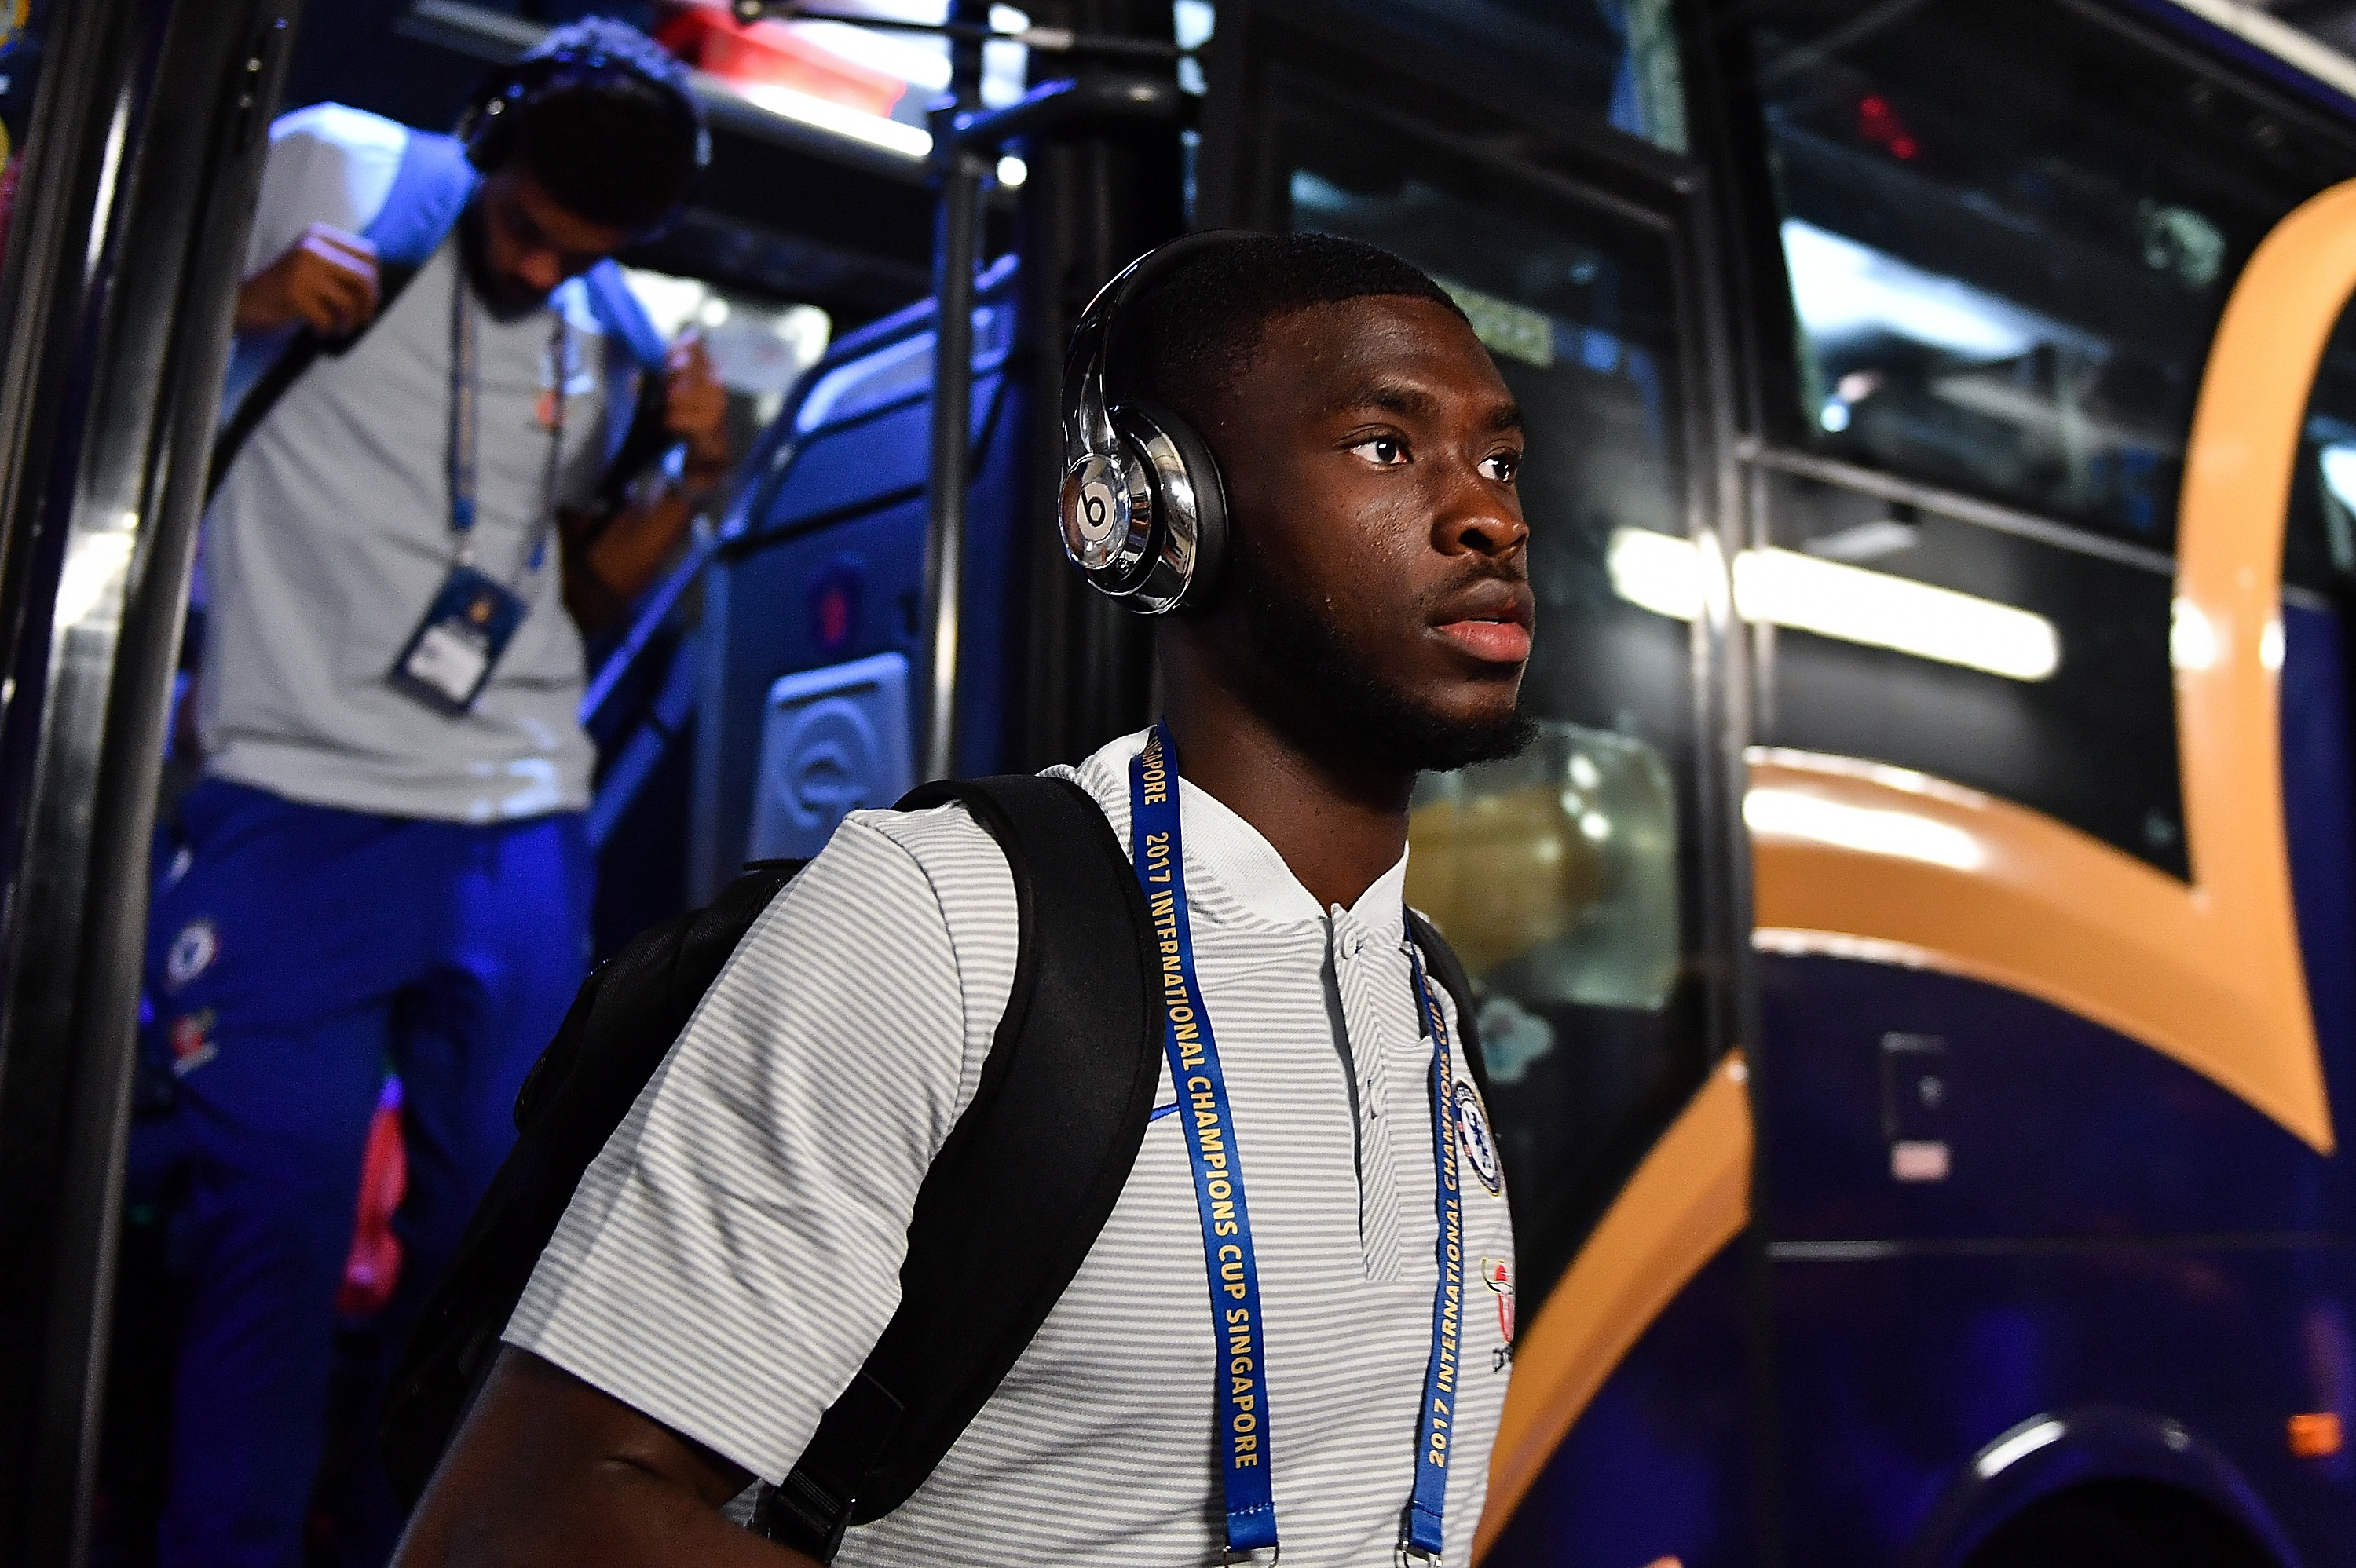 SINGAPORE - JULY 29: Fikayo Tomori of Chelsea FC arrives during the International Champions Cup match between FC Internazionale and Chelsea FC at National Stadium on July 29, 2017 in Singapore.  (Photo by Thananuwat Srirasant/Getty Images  for ICC)